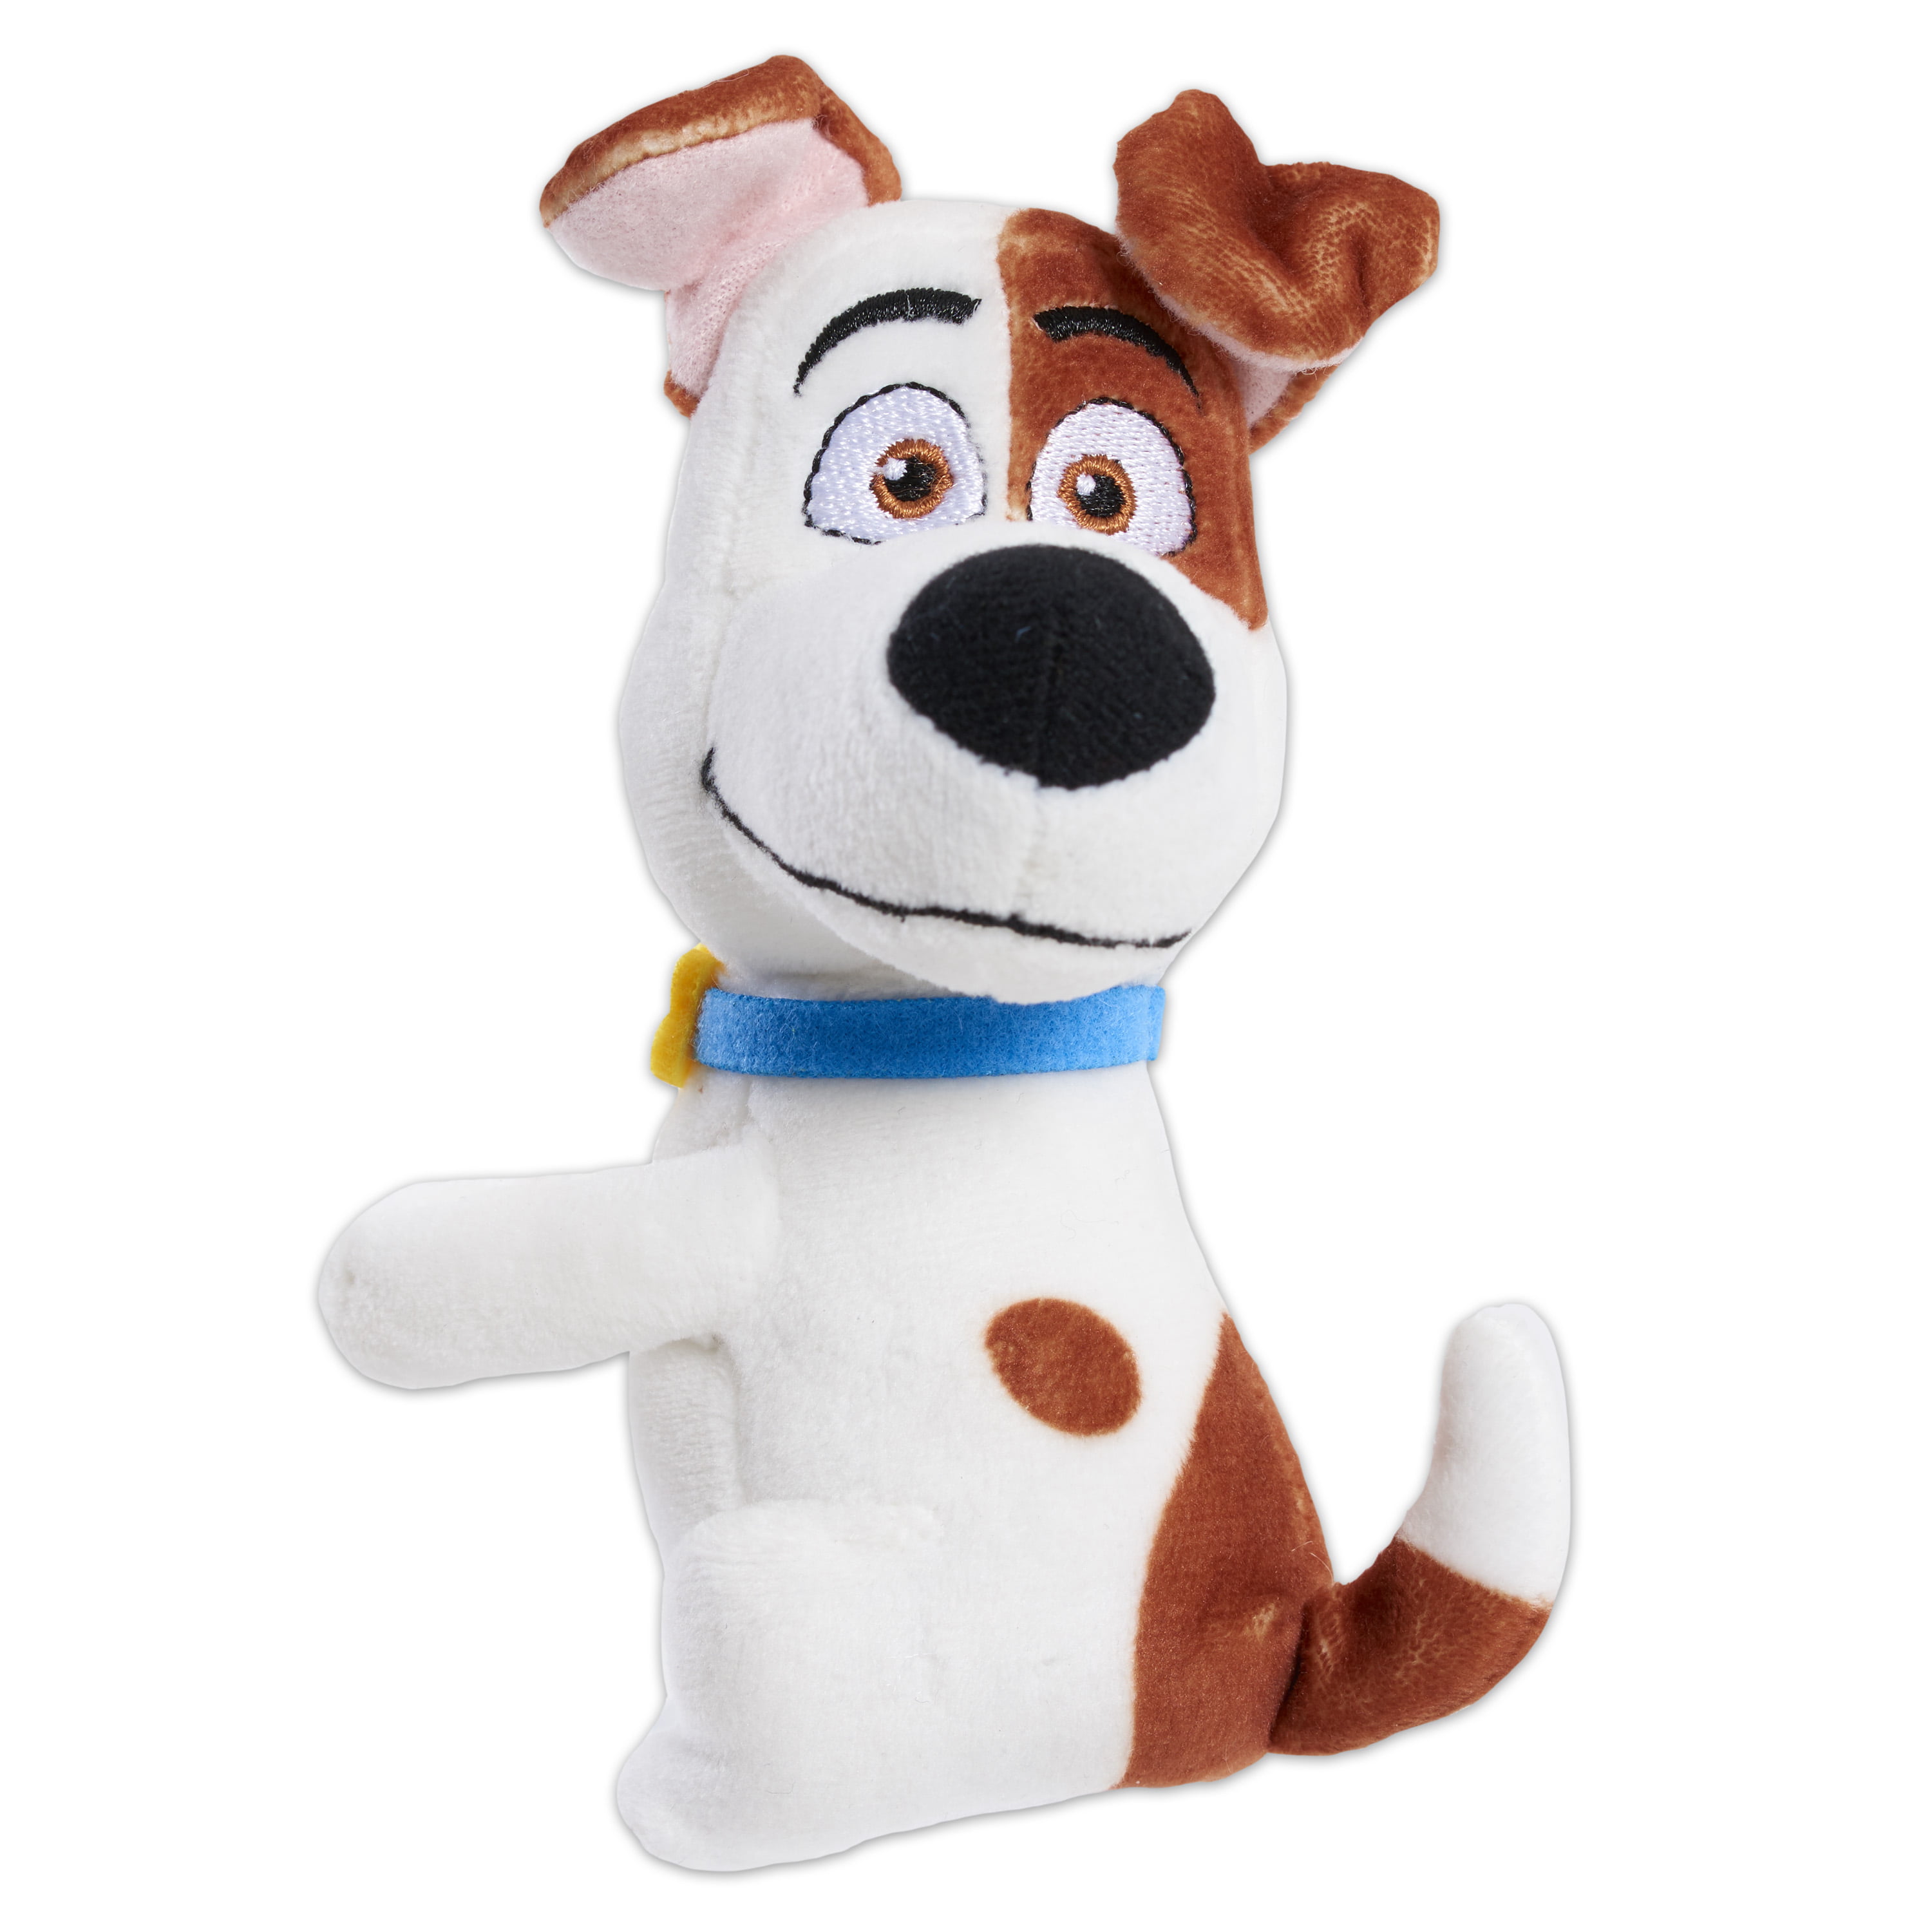 Official Illuminations The Secret Life of pets 2 MAX Plush Doll Soft Toys 8" 